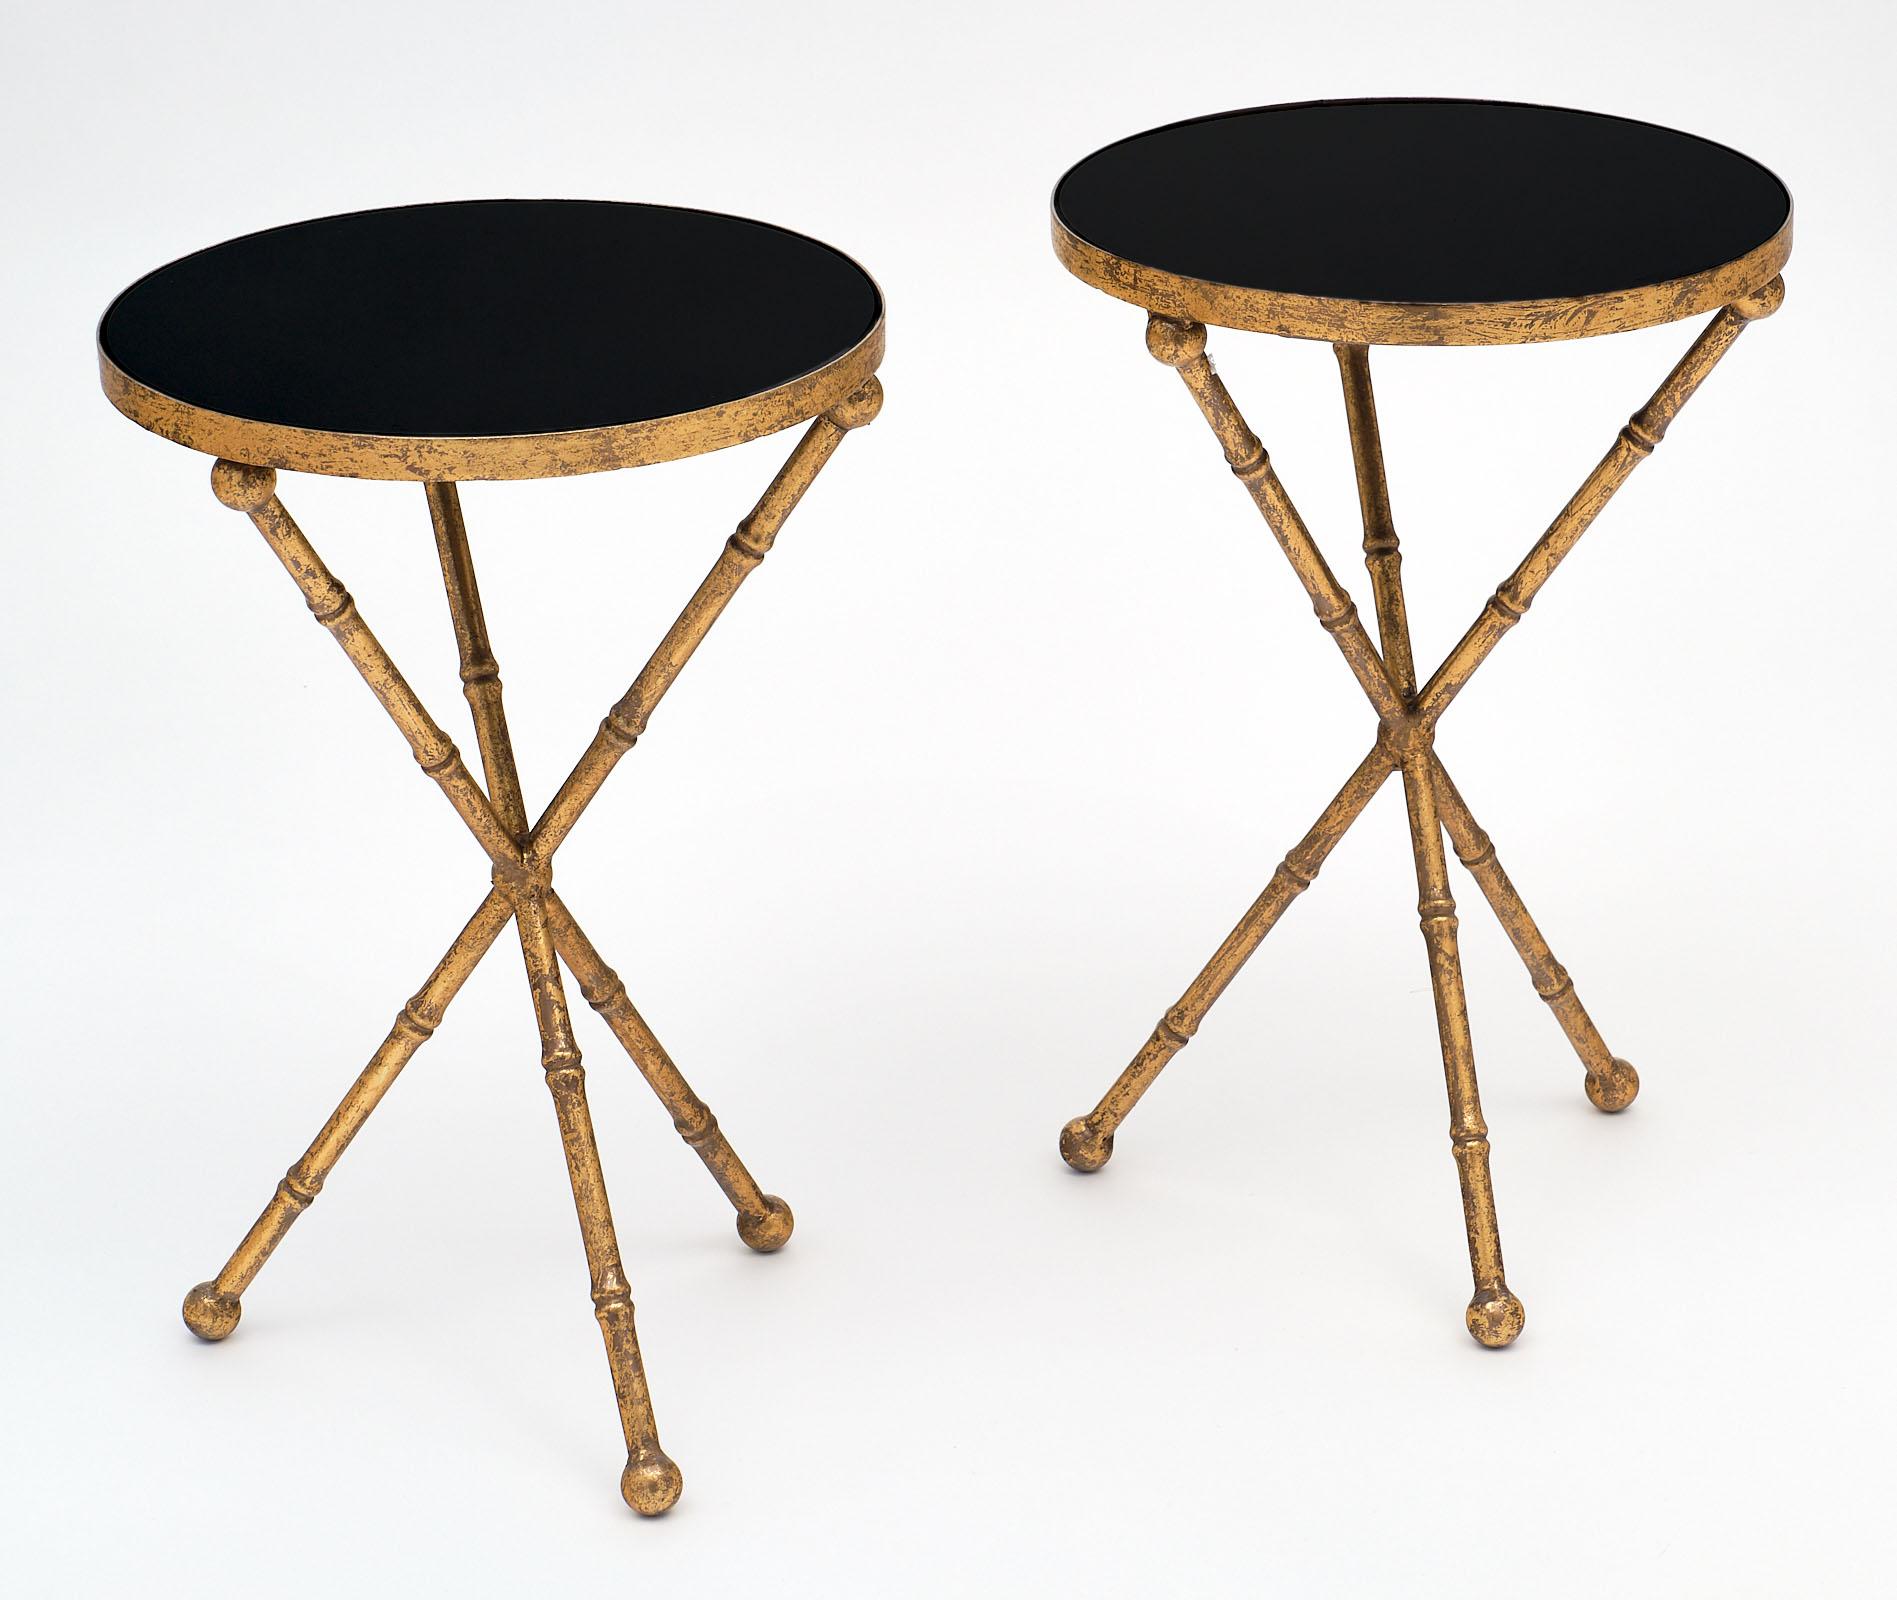 Pair of round gold leaf tripod side tables with stylized bamboo base and black glass top. This is a beautiful and dynamic set with lots of character!